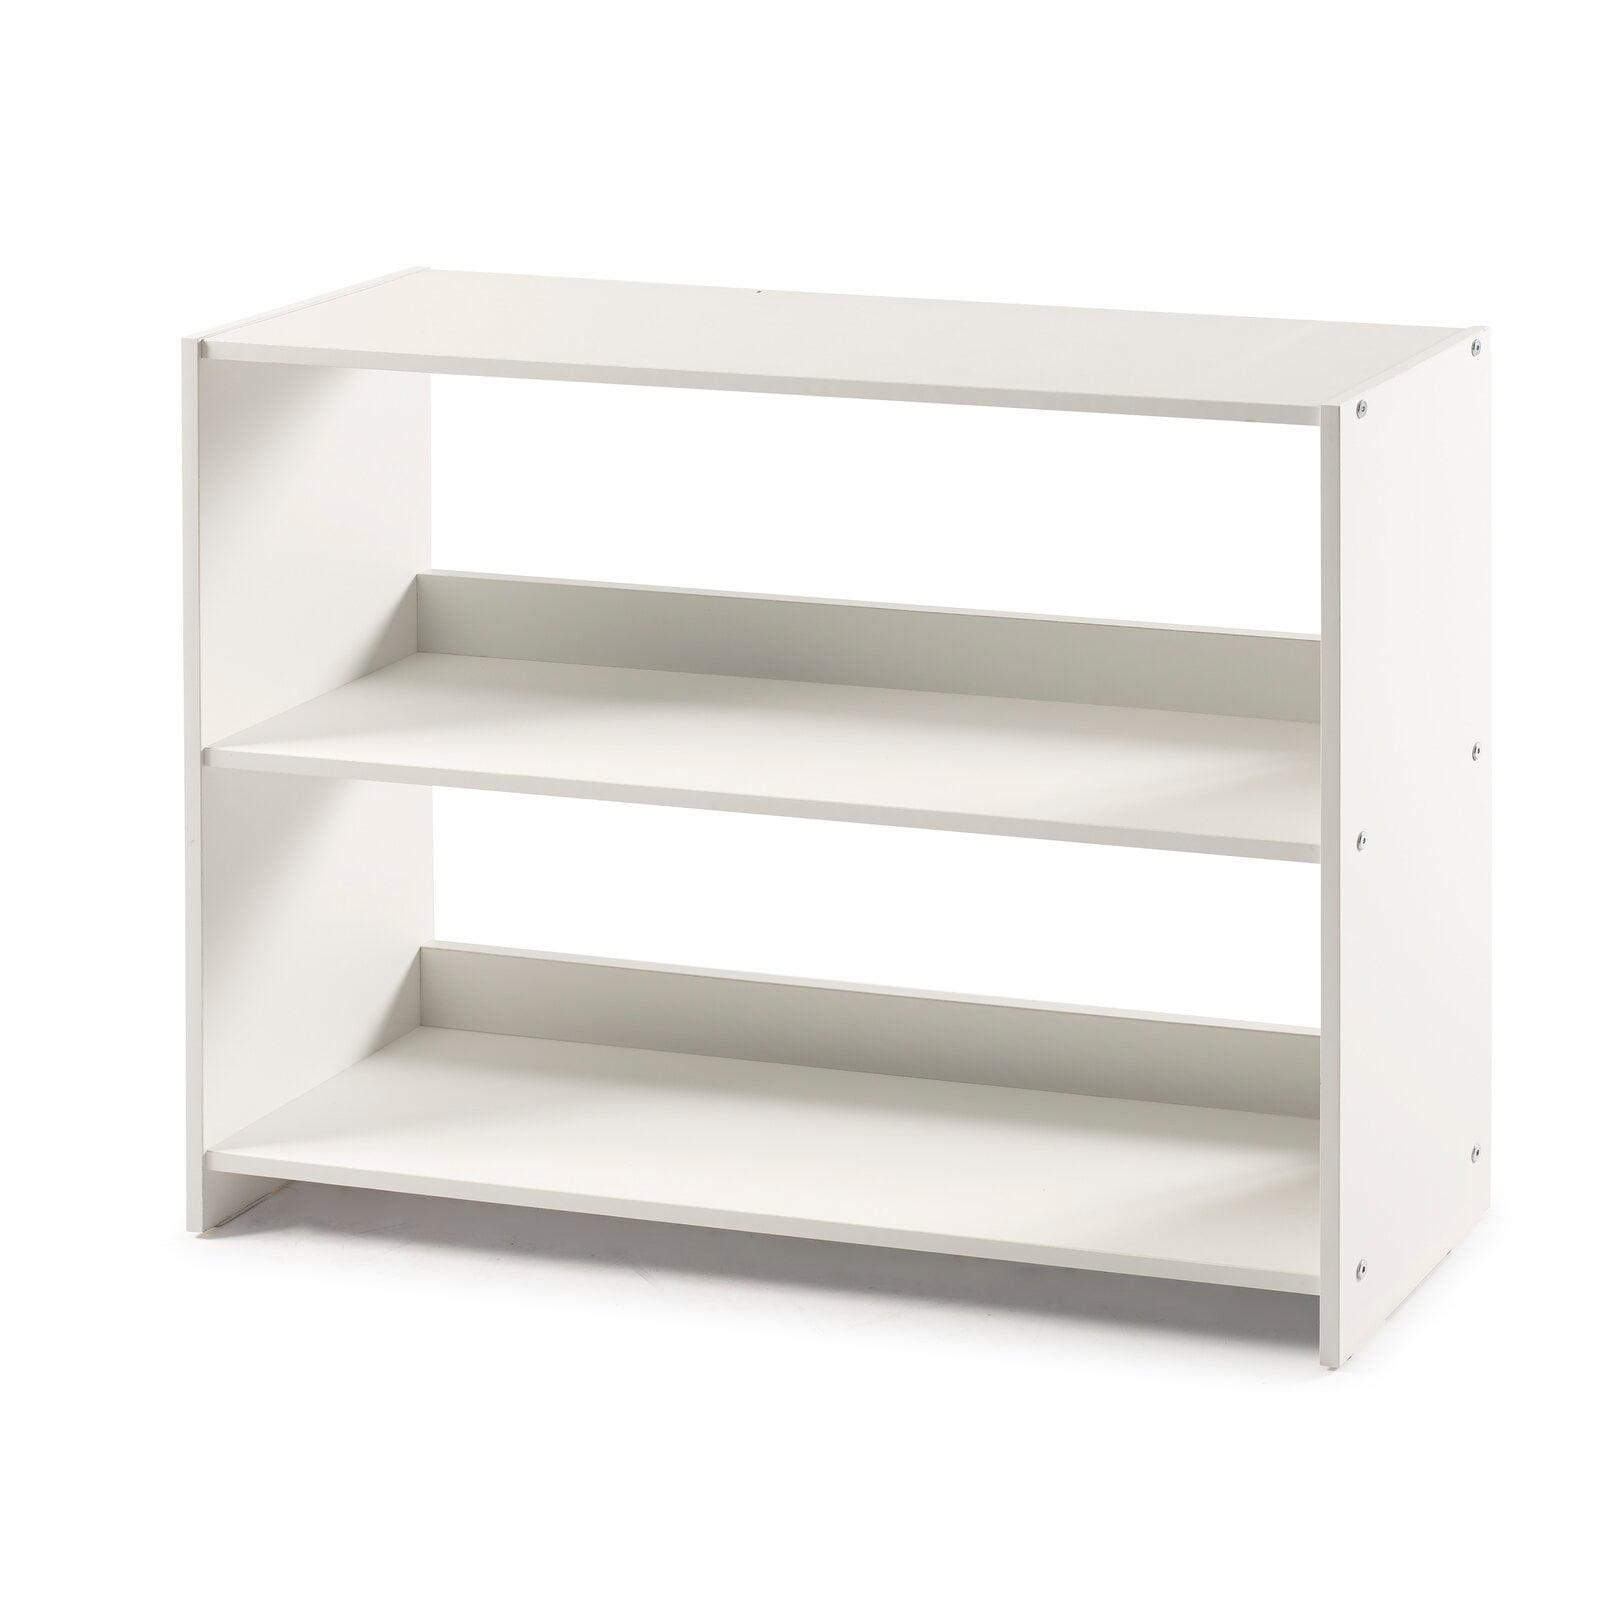 Adjustable Two-Tone Pine Wood Kids Bookcase in White & Gray